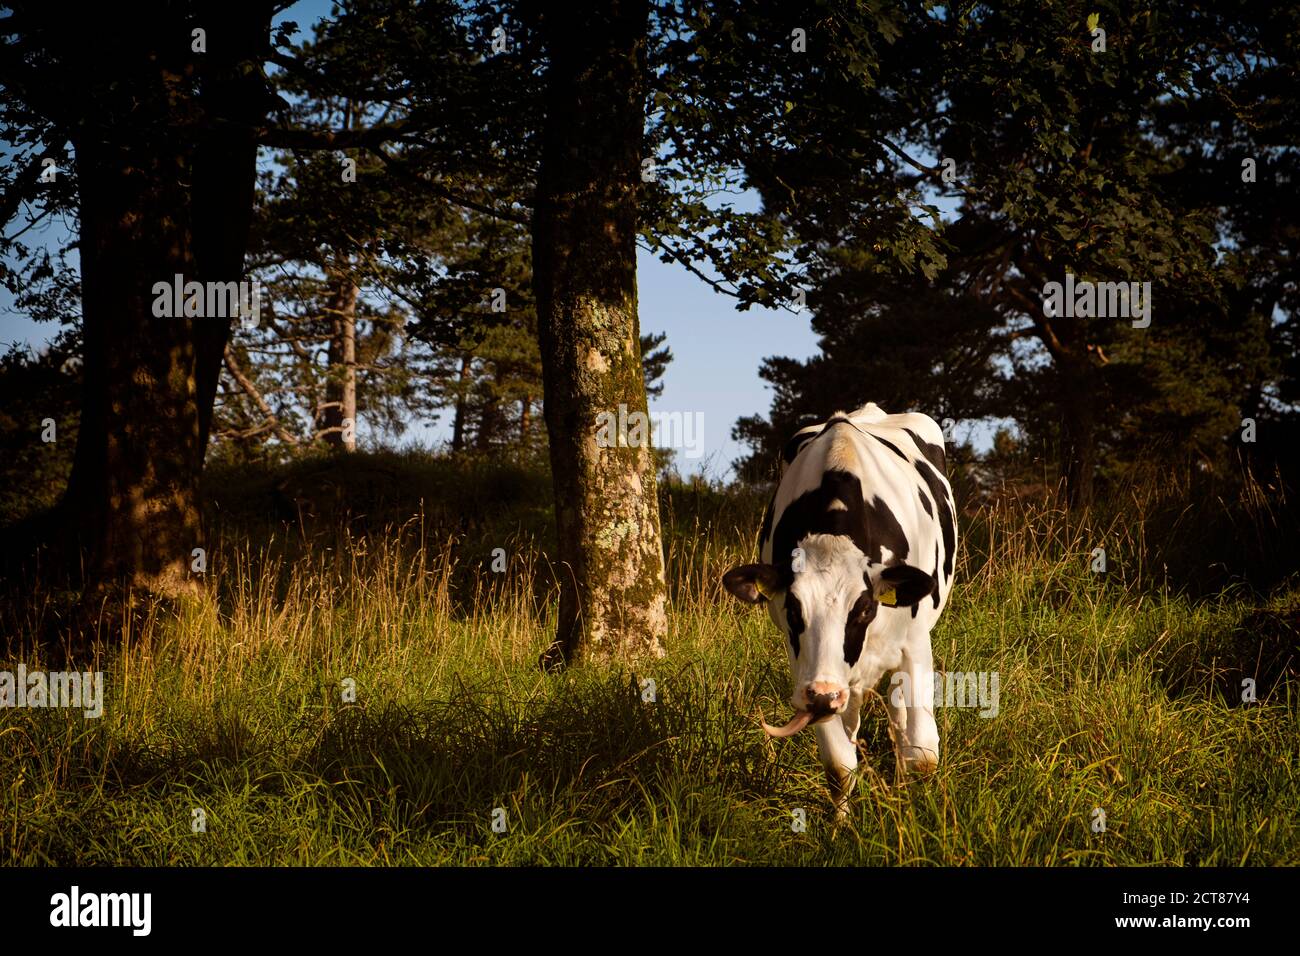 A cow approaching with it's tongue hanging out to one side. Stock Photo